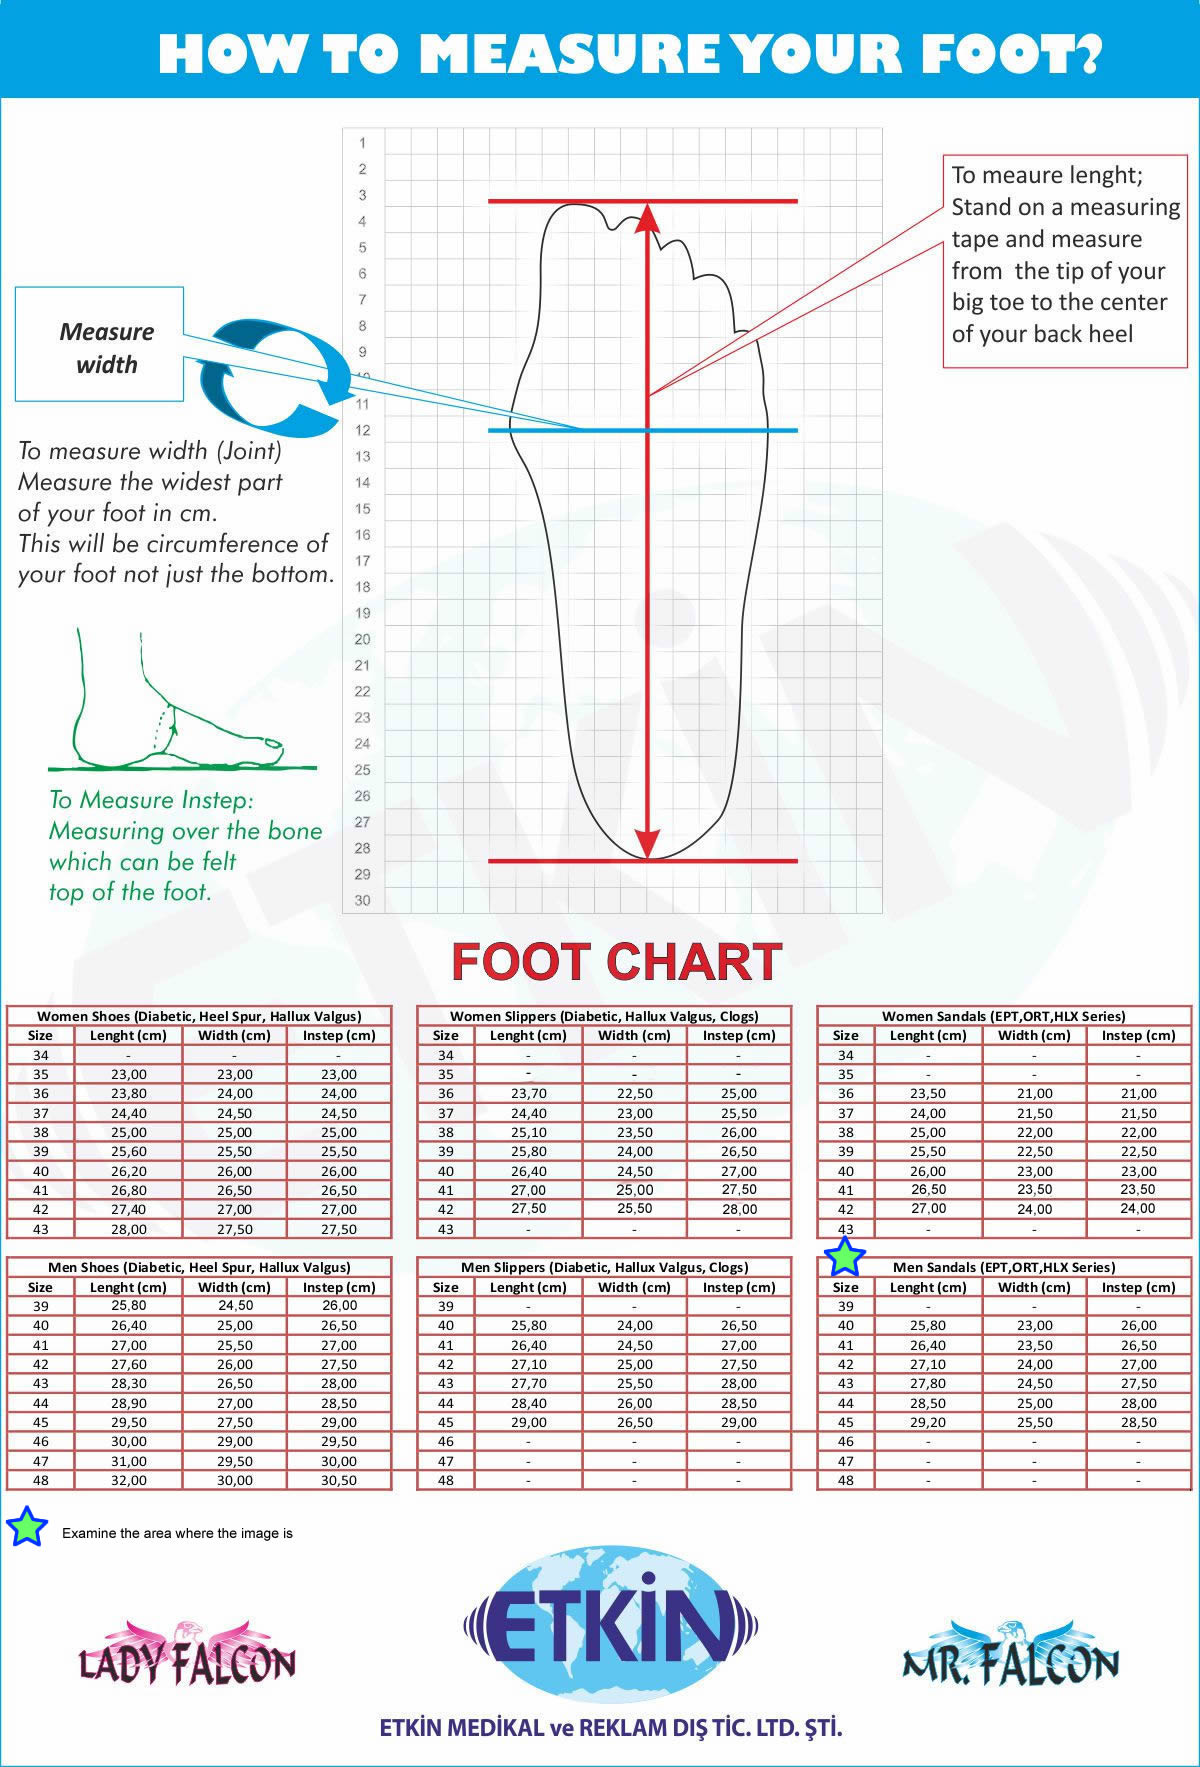 Men's Sandals For Bunions and Heel Pains Size Chart